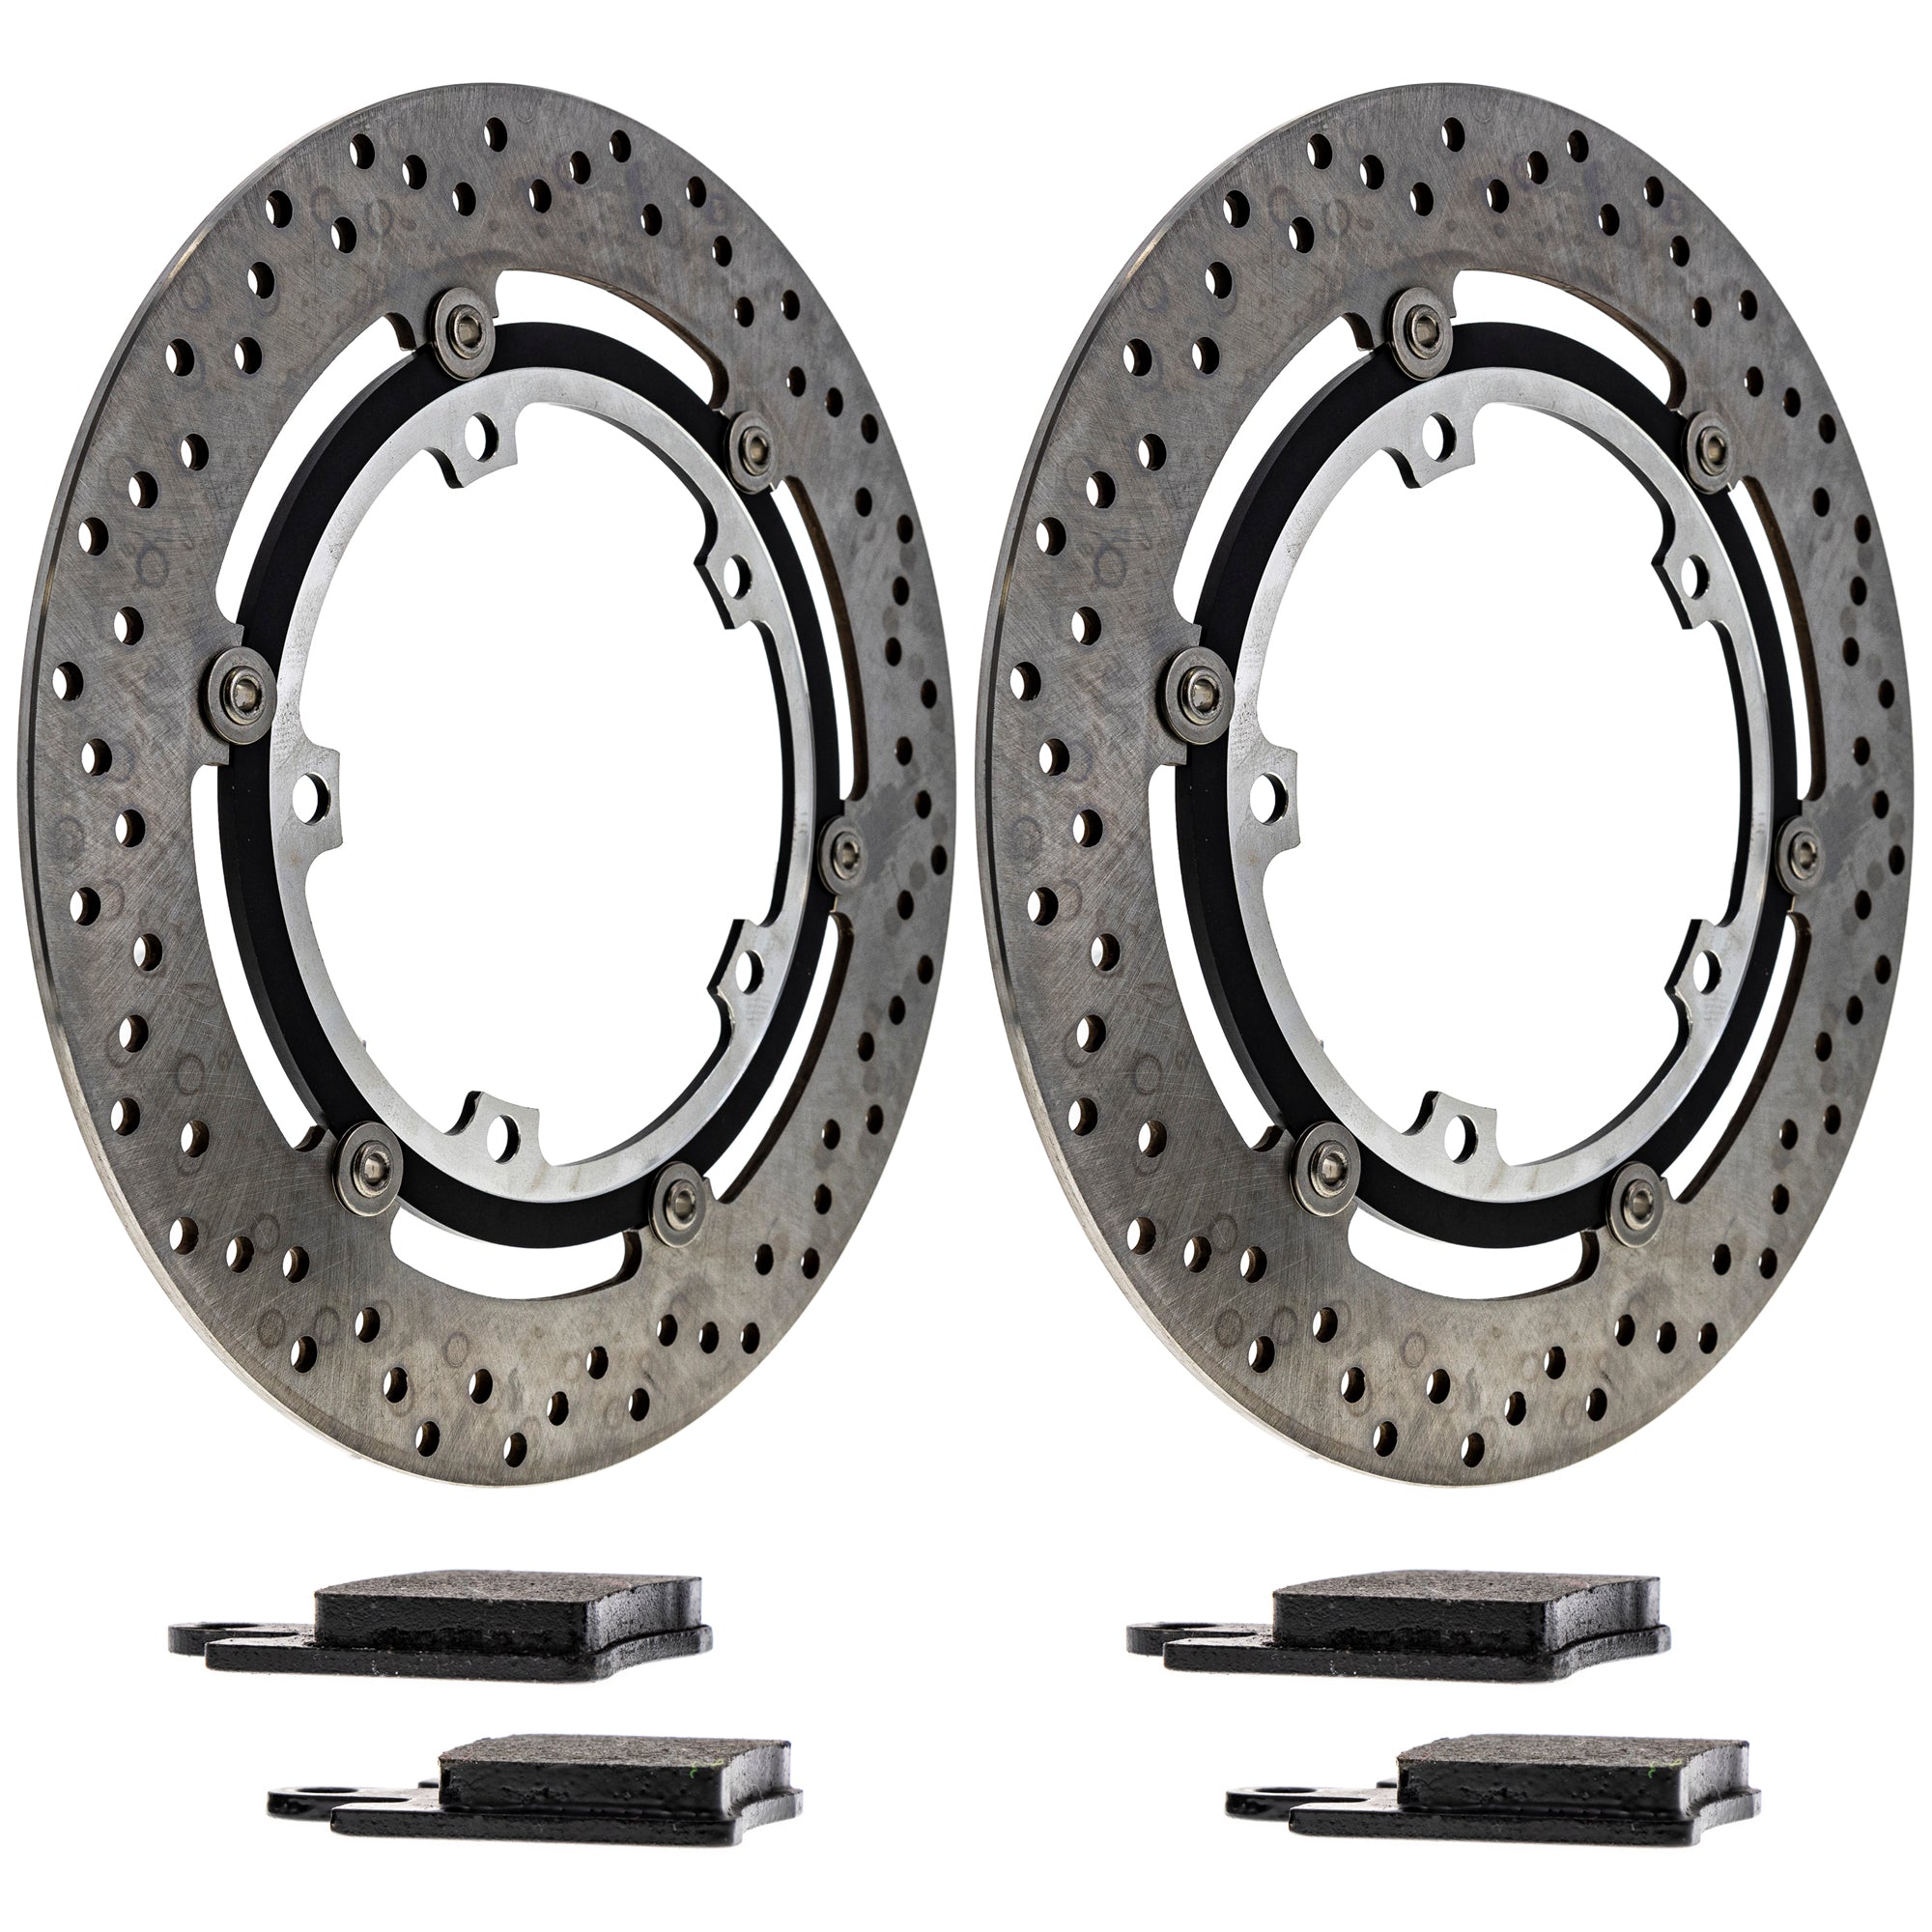 Front Brake Rotors and Pads Kit for zOTHER Polaris Trophy 3P6-W0045-00-00 T2022395 NICHE MK1007278